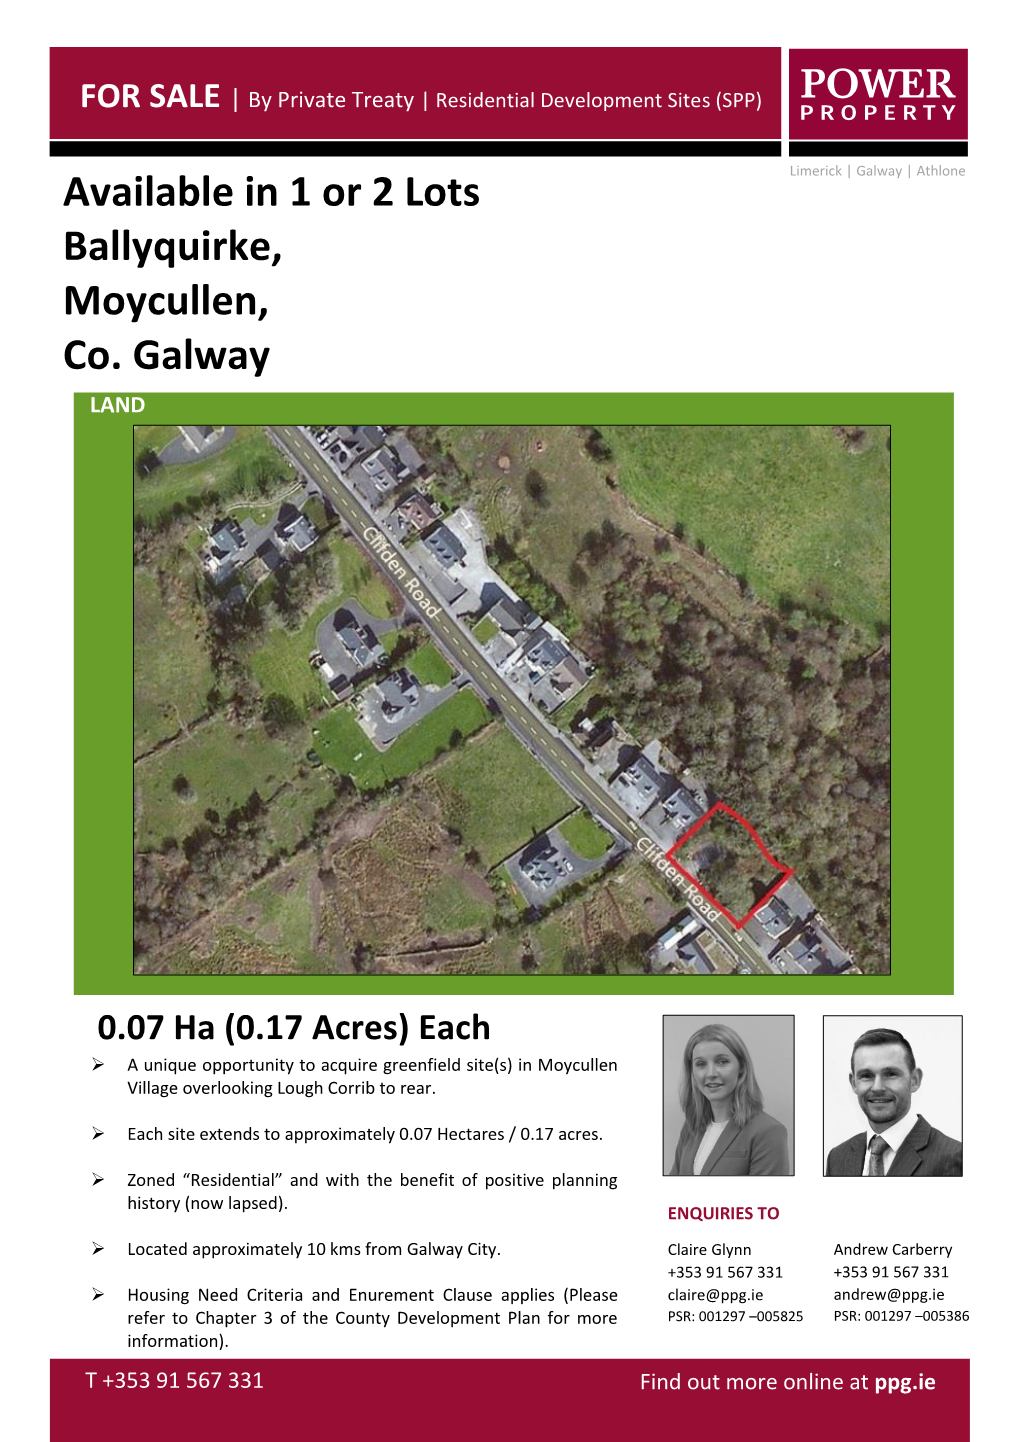 Available in 1 Or 2 Lots Ballyquirke, Moycullen, Co. Galway